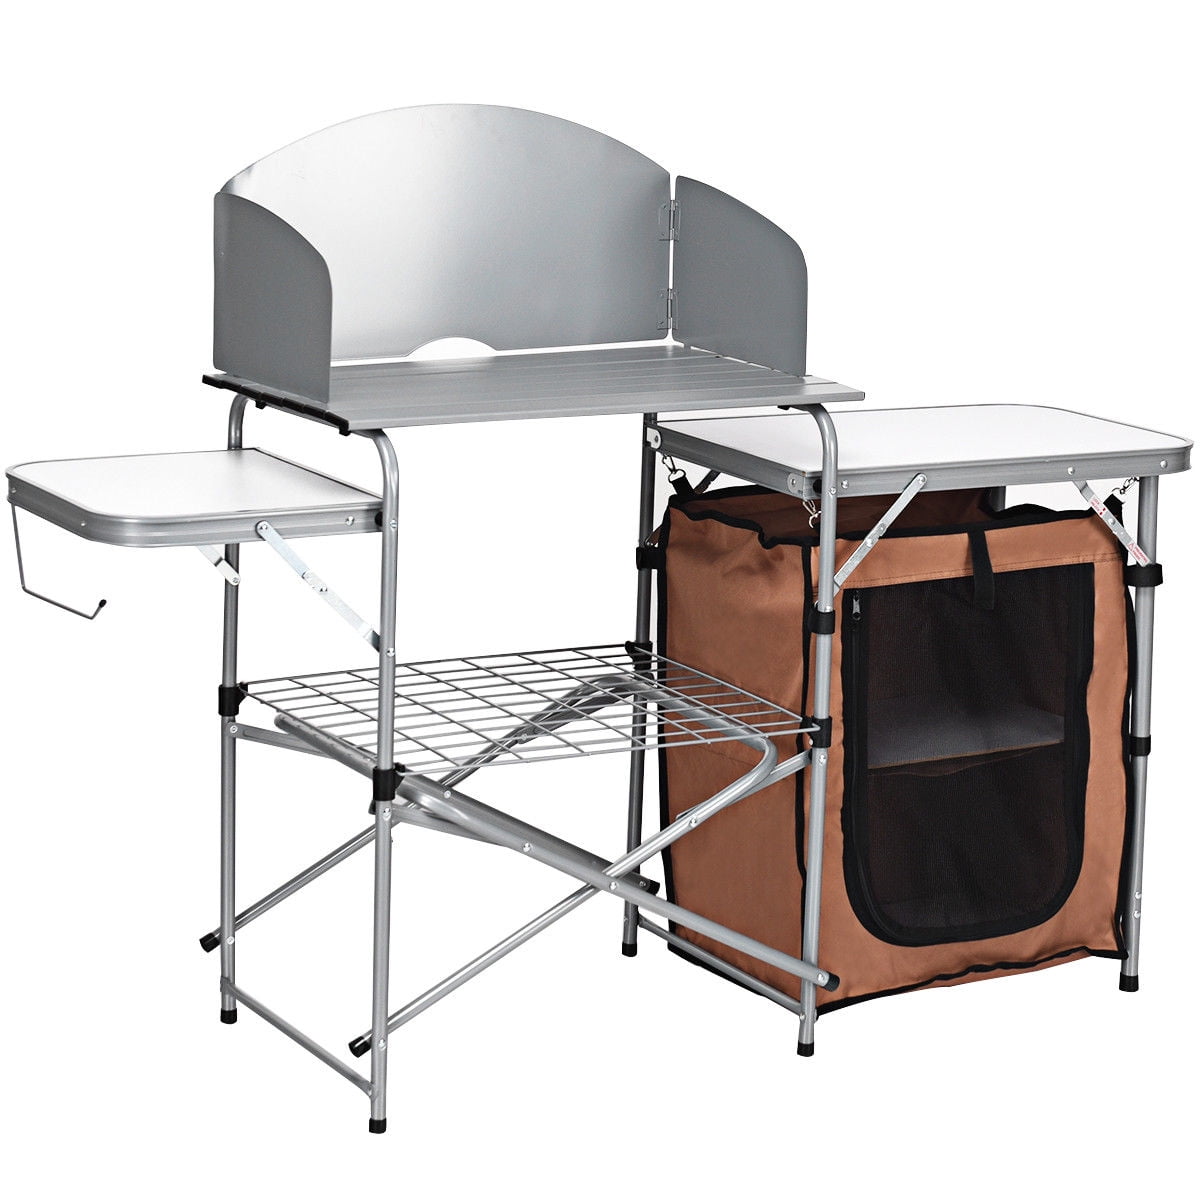 Folding Camping Table Aluminium Portable Adjustable Party BBQ Outdoor Carry Bag 